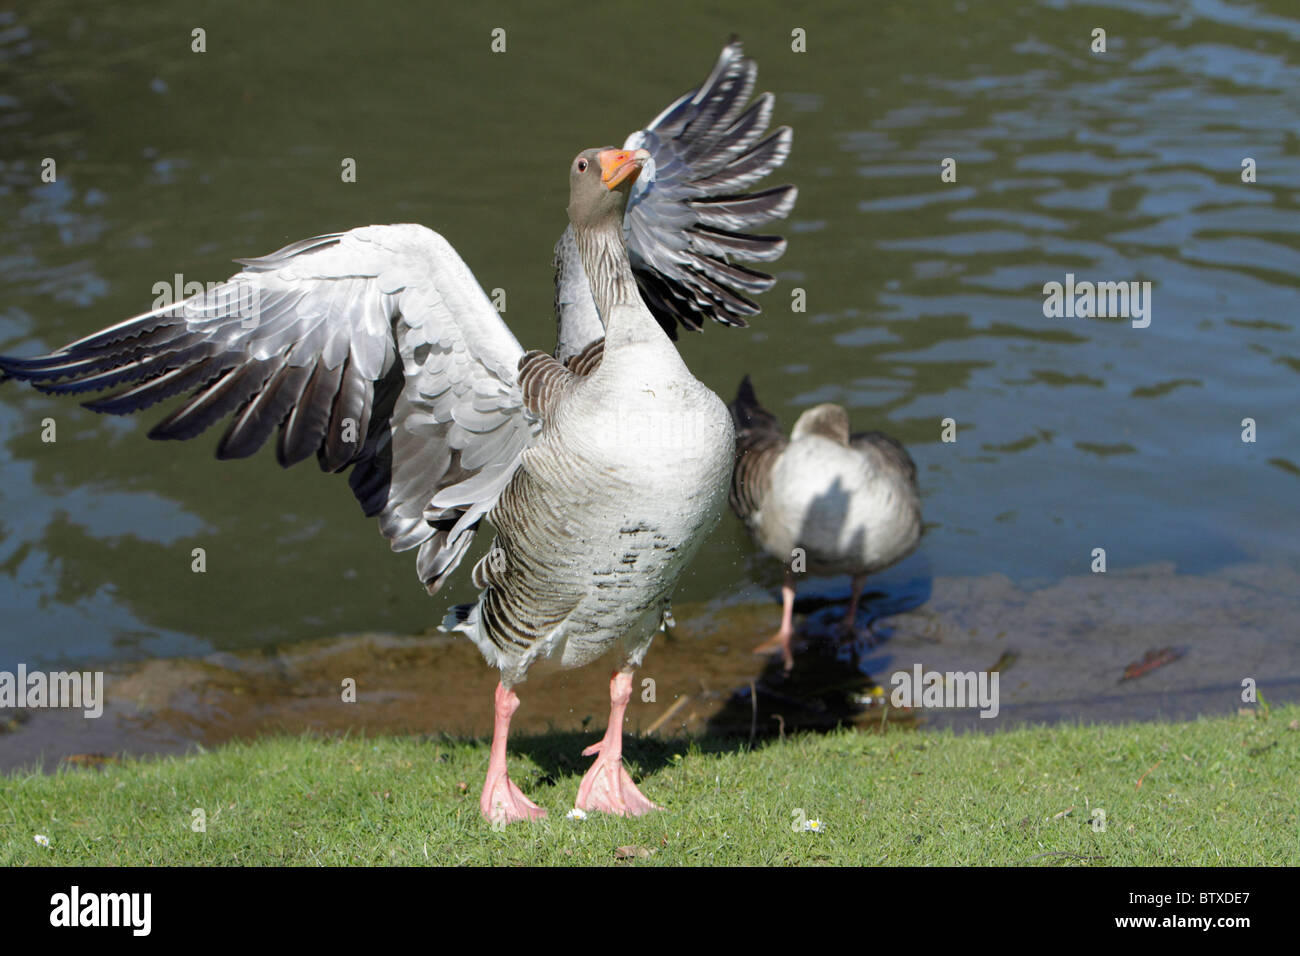 Greylag Goose (Anser anser), bird emerging from lake and flapping wings to dry them, Germany Stock Photo